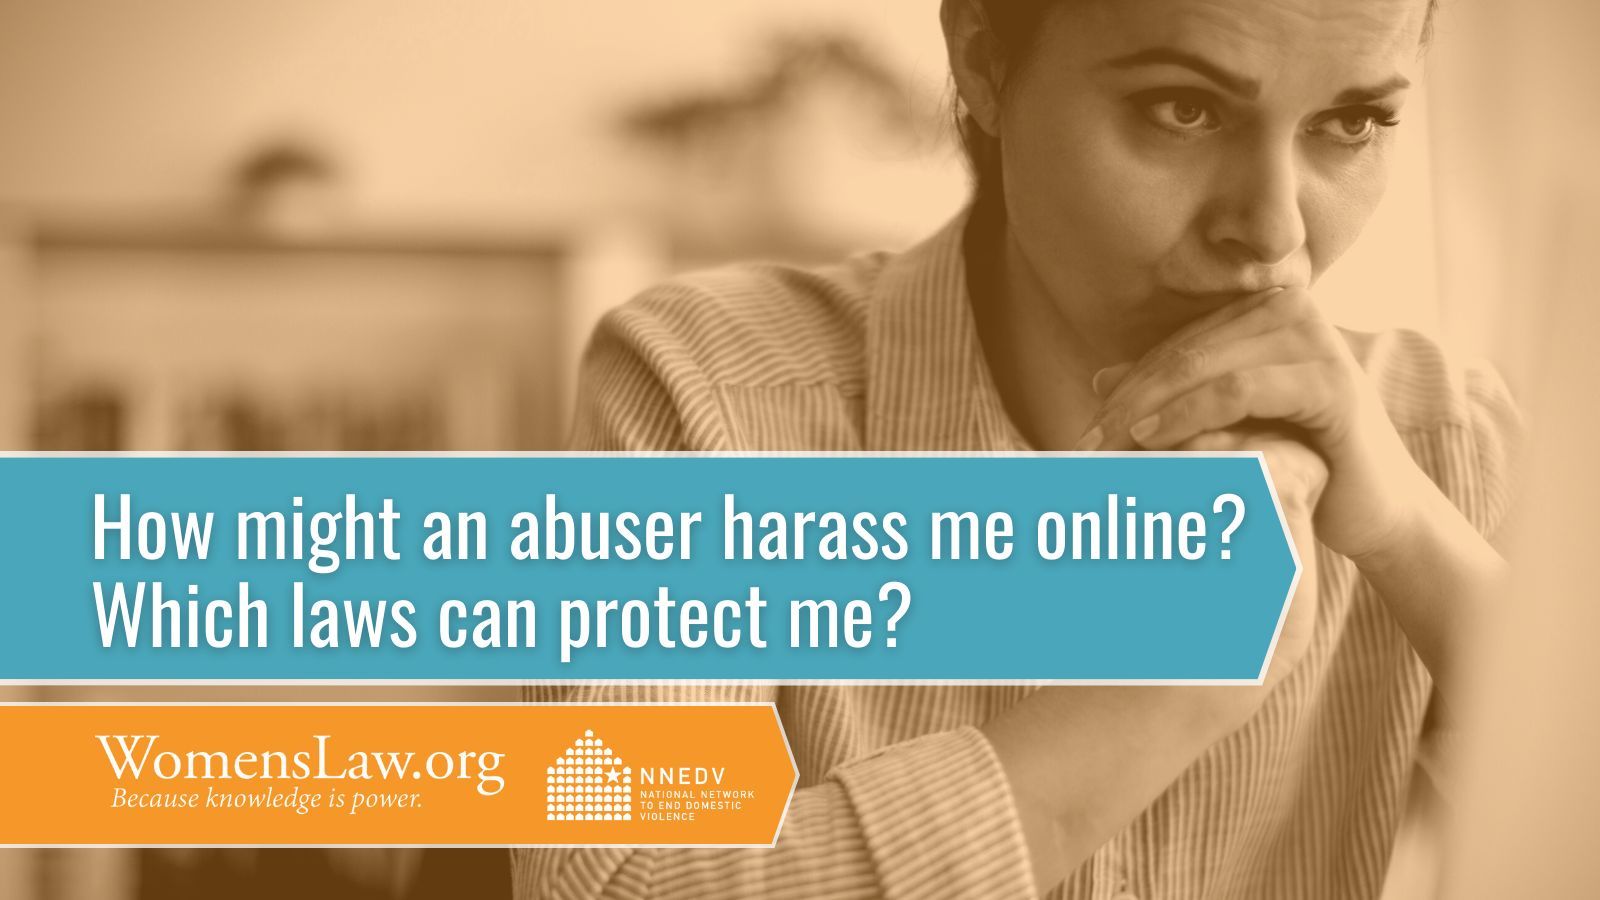 WomensLaw.org on X: There are many ways that an abuser might choose to  misuse tech in order to harass and stalk, and laws can help protect  victims. Nobody deserves to experience stalking,